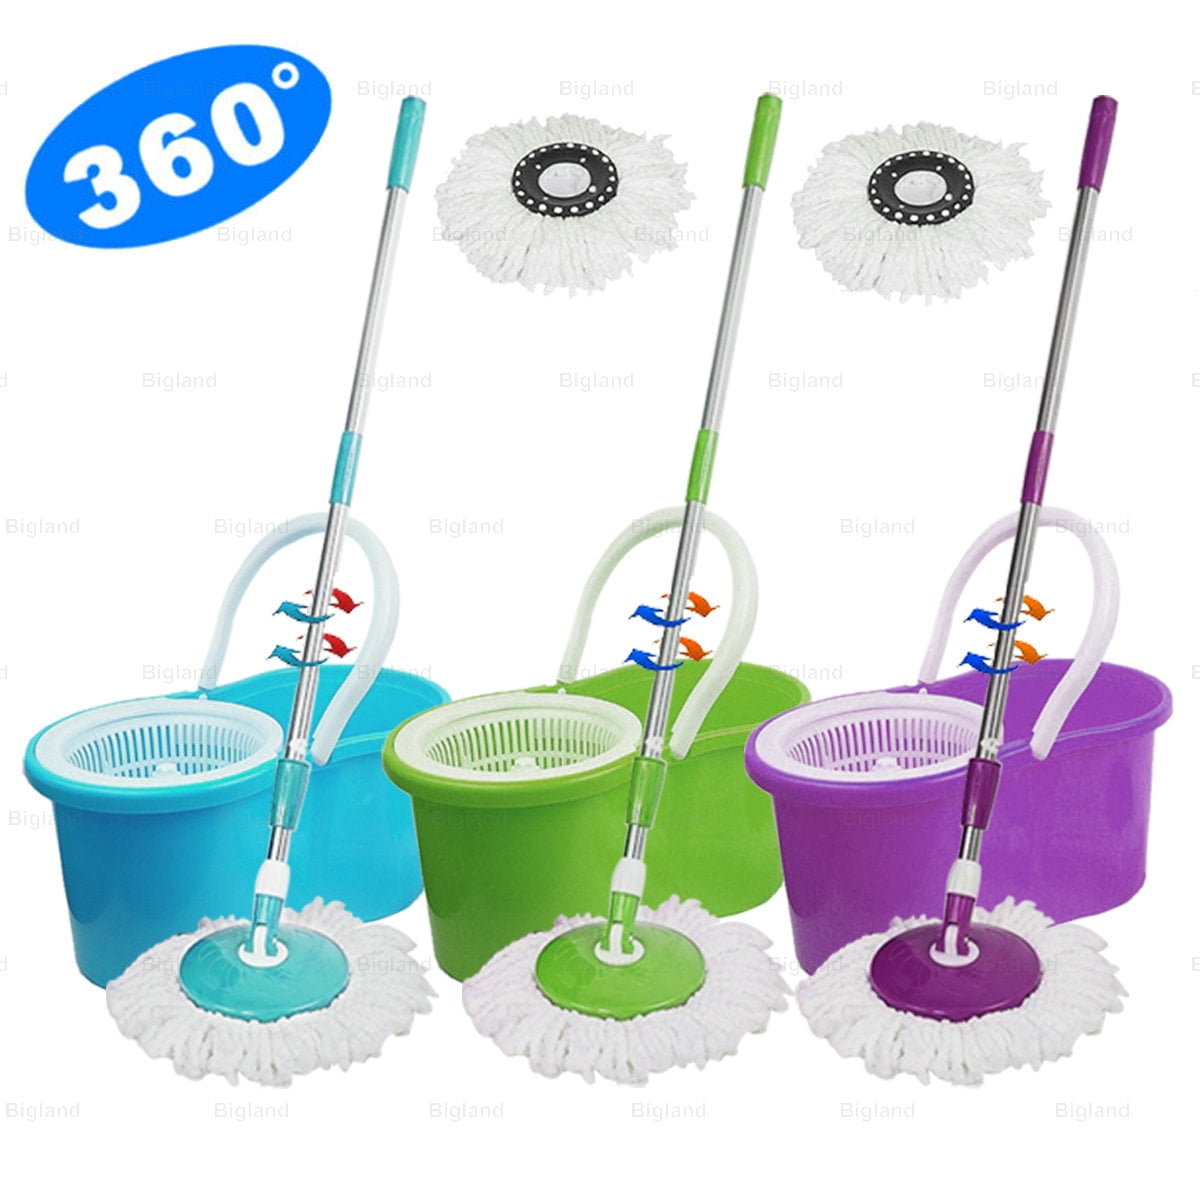 360 Degree Spinning Mop bucket Home 2 Mop Cleaning heads with colapsible Bucket 